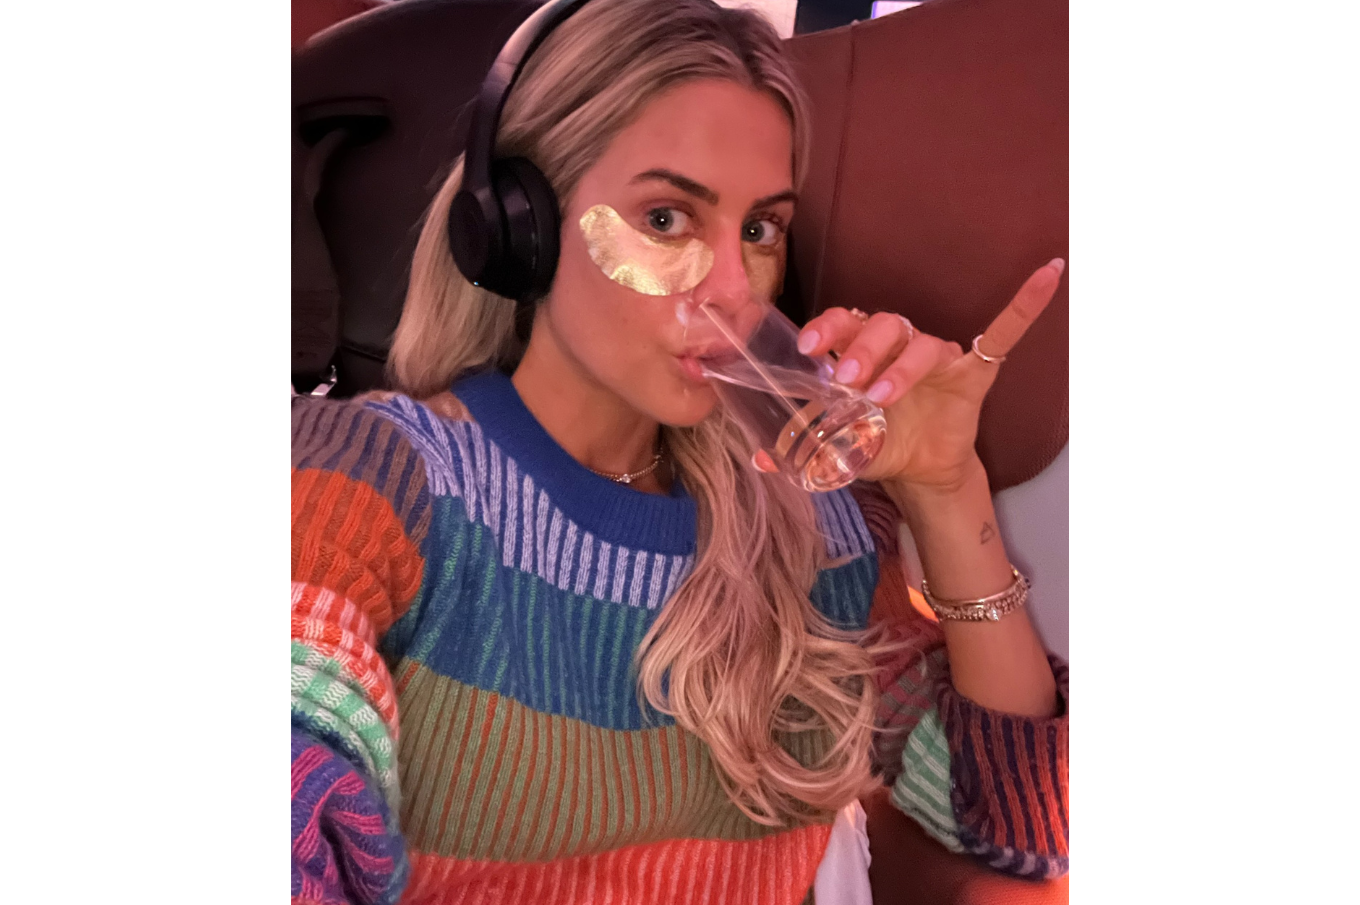 Logan on plane sipping wine with eye masks on